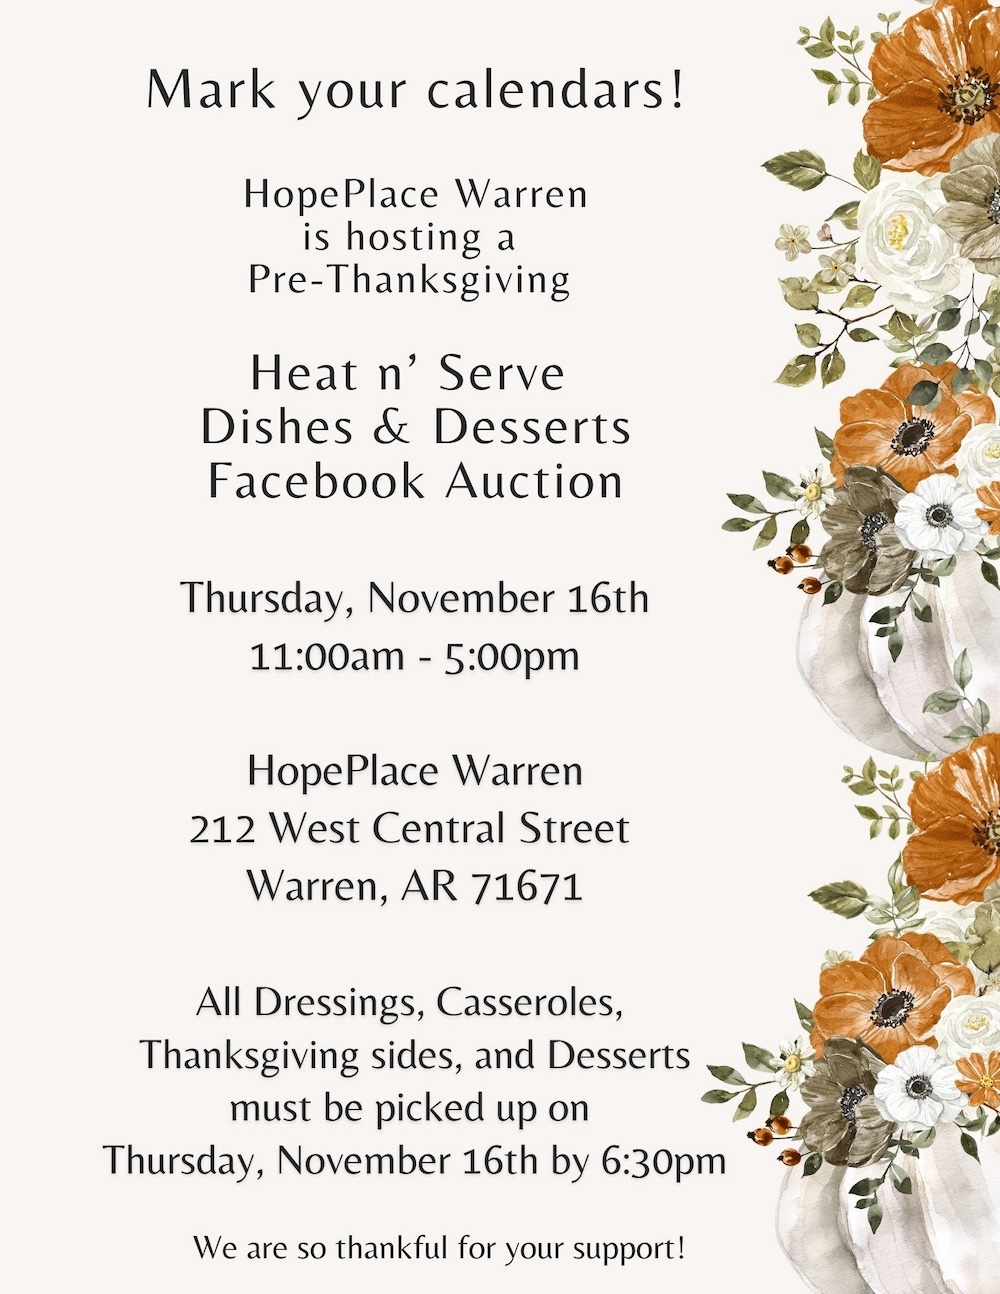 HopePlace Warren to host Facebook Auction ahead of Thanksgiving, November 16th